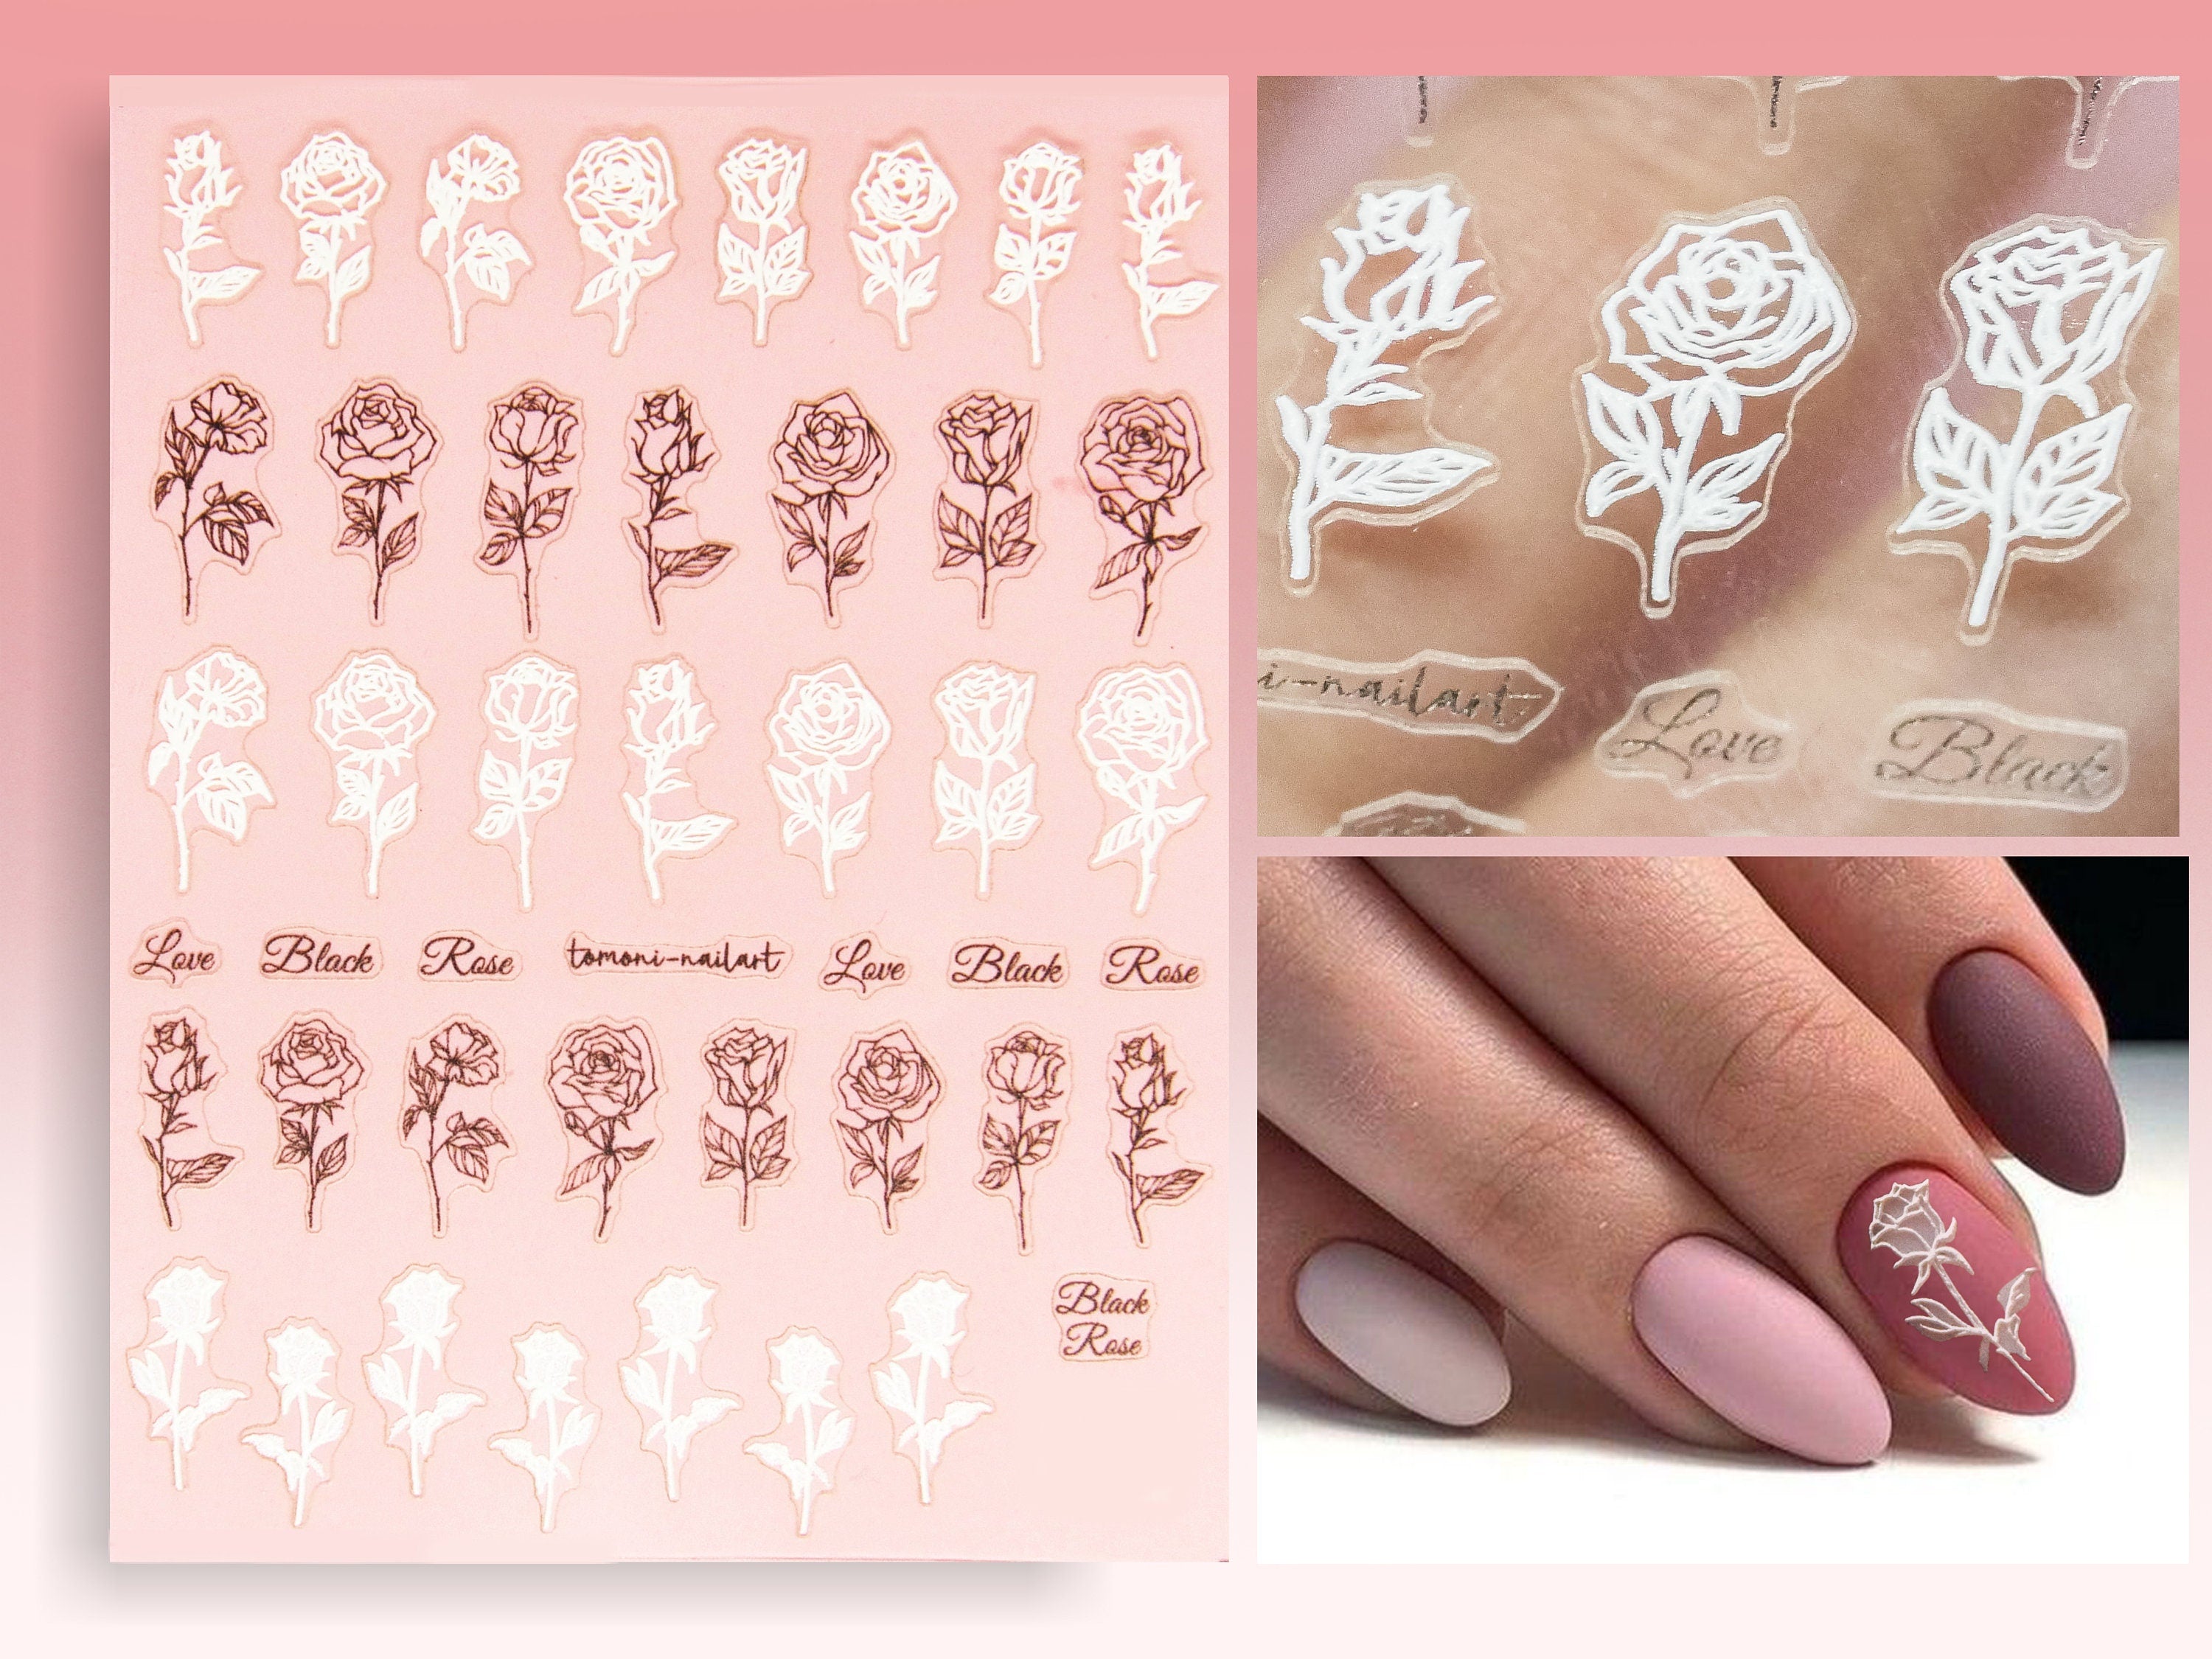 QXUJI 3D Rose Nail Art Charms Flowers Rose Buds Nail Art Accessories  Decoration Metal Alloy Nail Art Decals for Girls Women DIY Nail Design  Craft Jewelry Making Gold and Silver 7 Styles